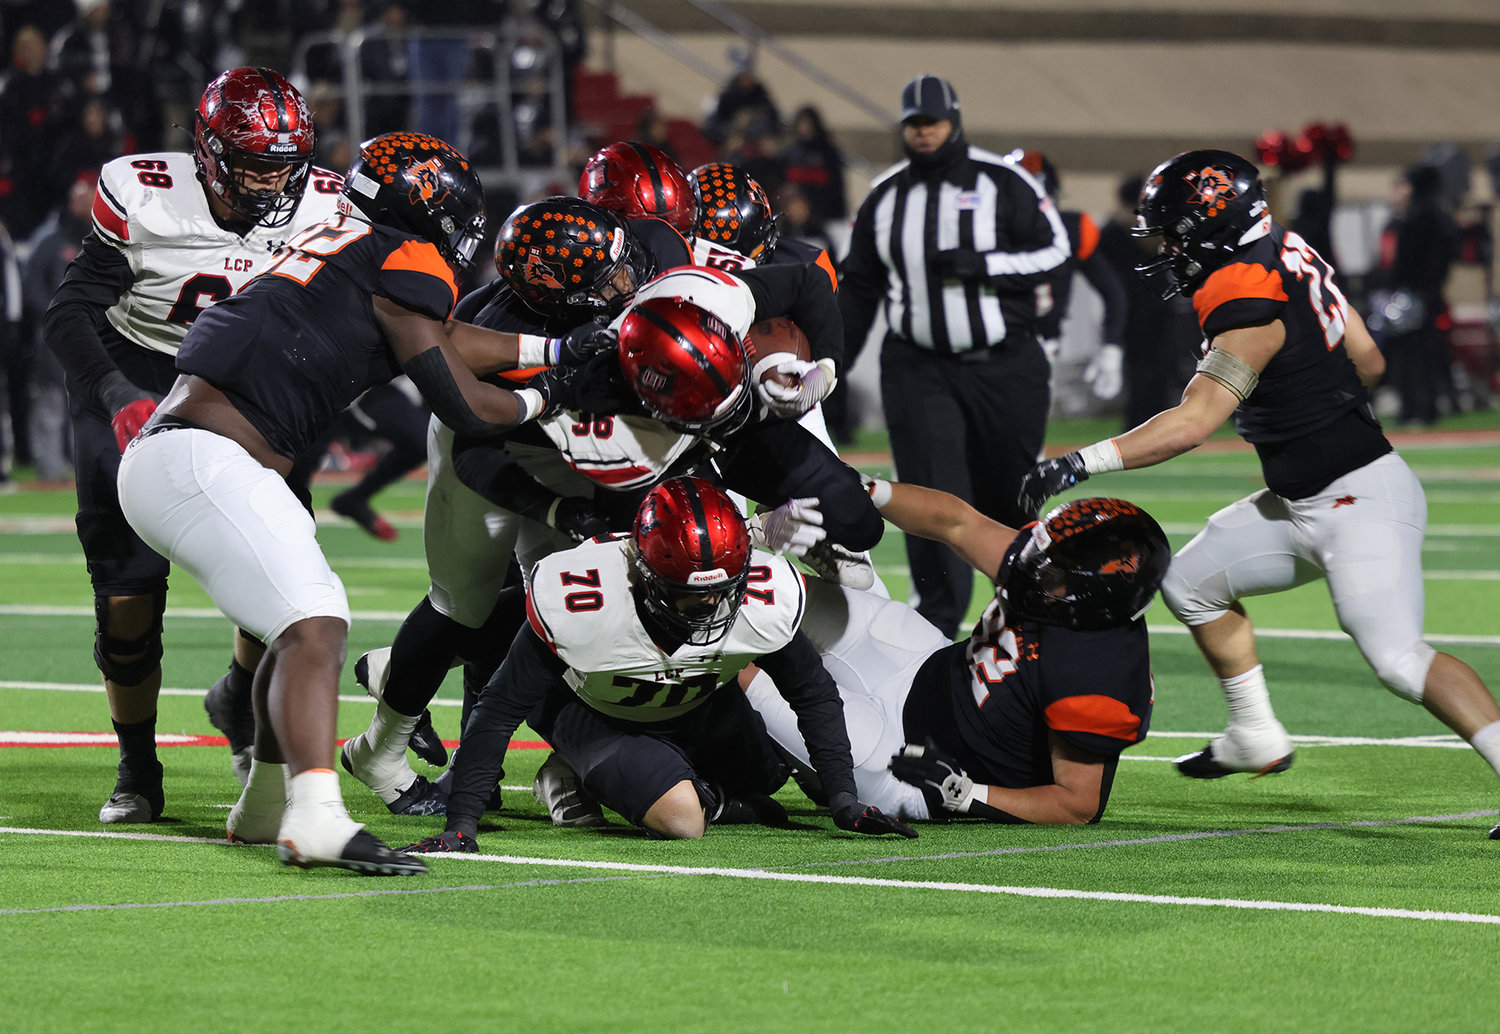 The Bearcats' defense converges on a Cooper ball carrier.